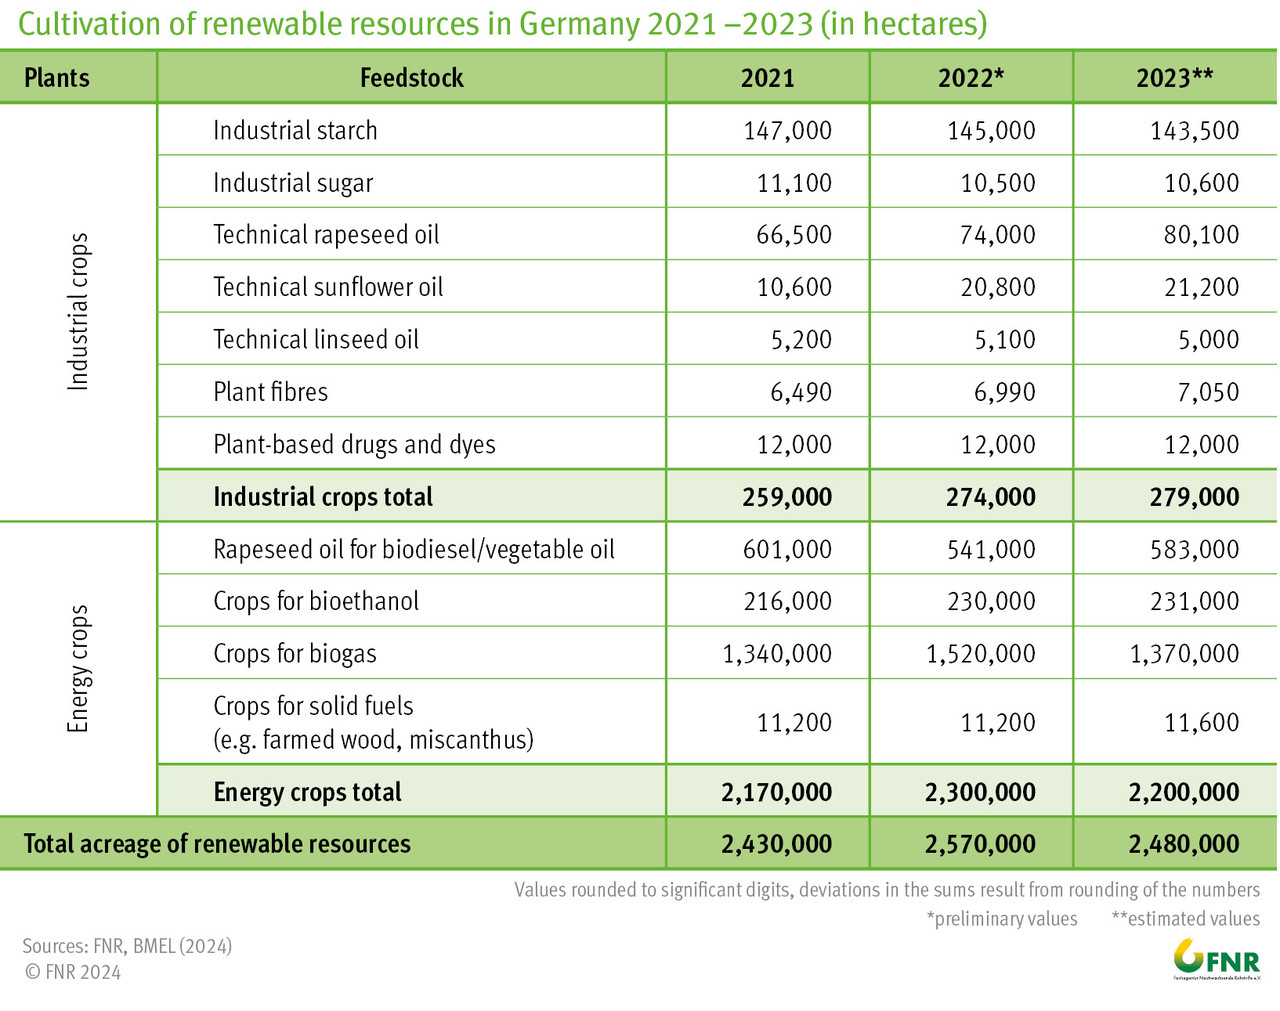 Cultivation of renewable resources in Germany 2020-2022 (in hektares)